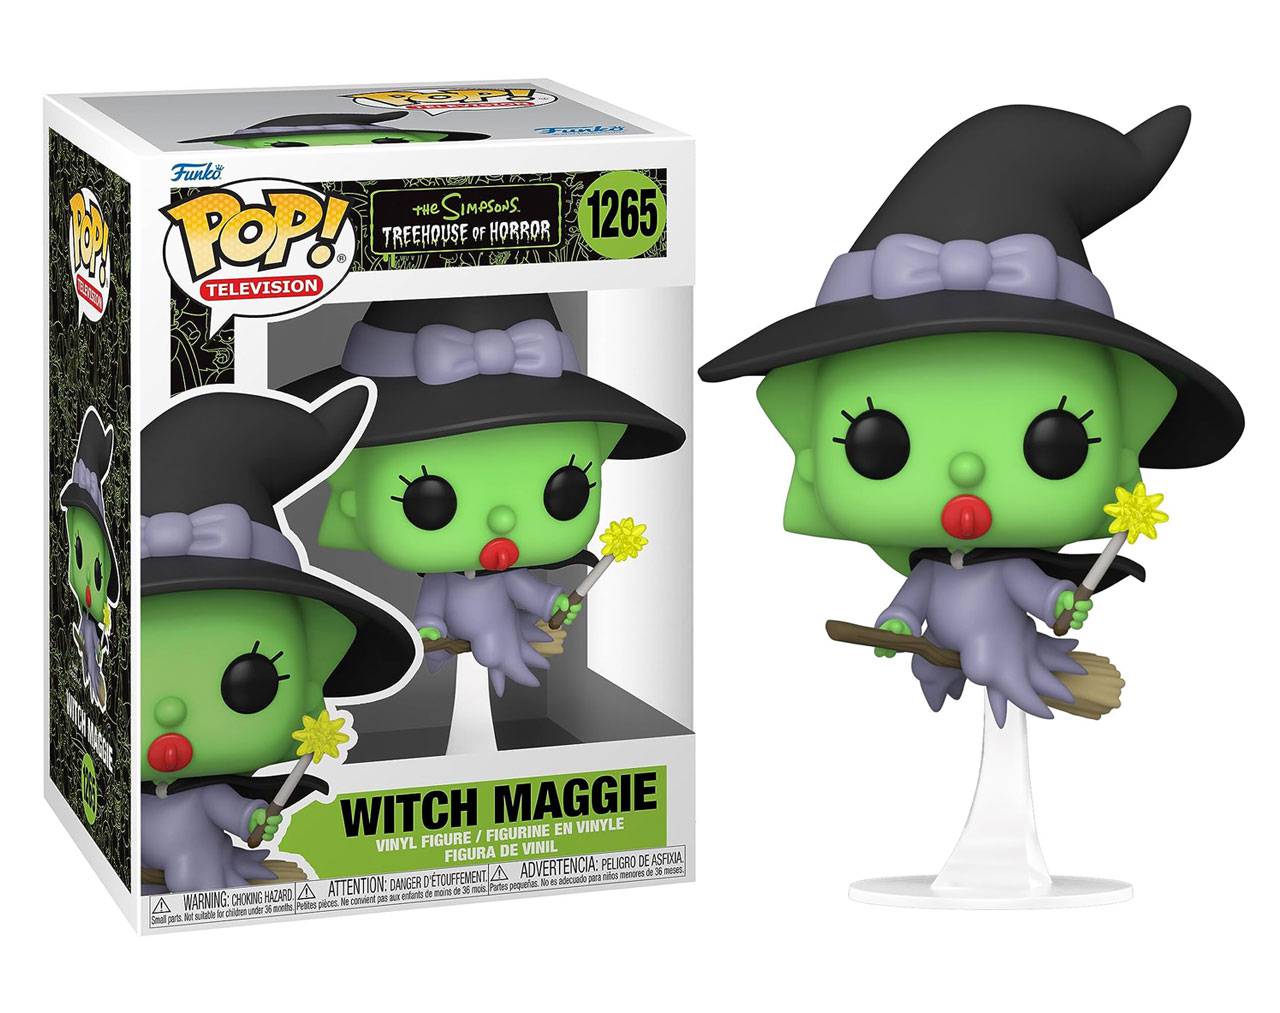 Witch Maggie (Treehouse of Horror) - The Simpsons Pop! Vinyl